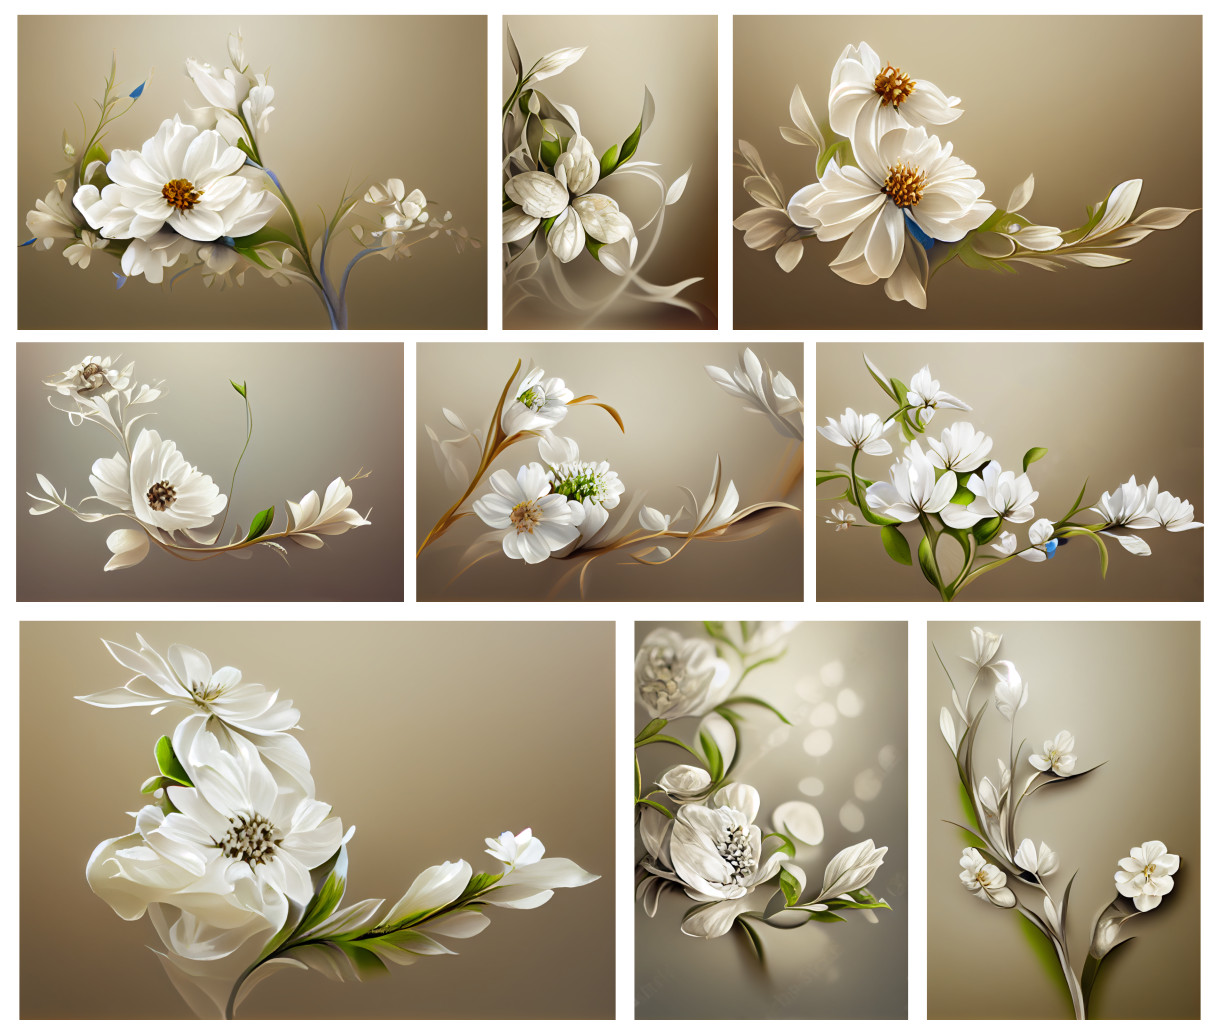 Sublime Simplicity: White Flower on Beige Background Designs